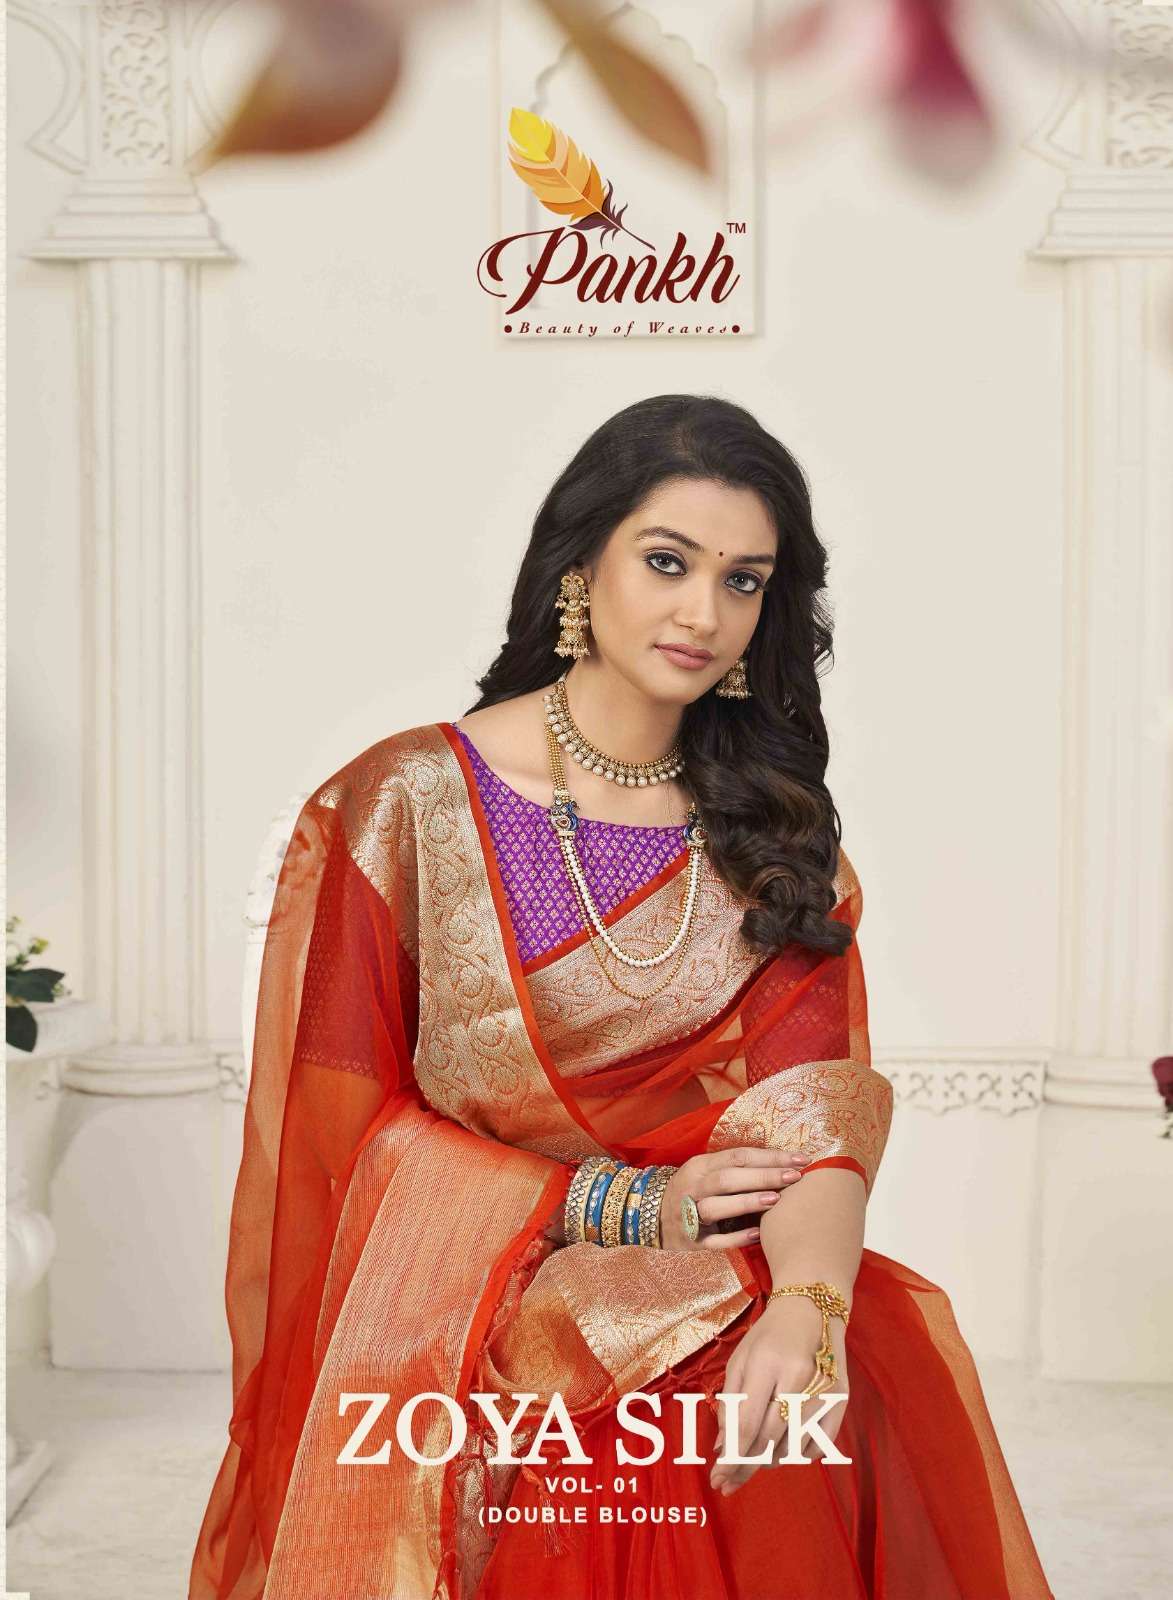 pankh zoya silk vol 1 5401-5410 traditional amazing saree with double blouse collection 